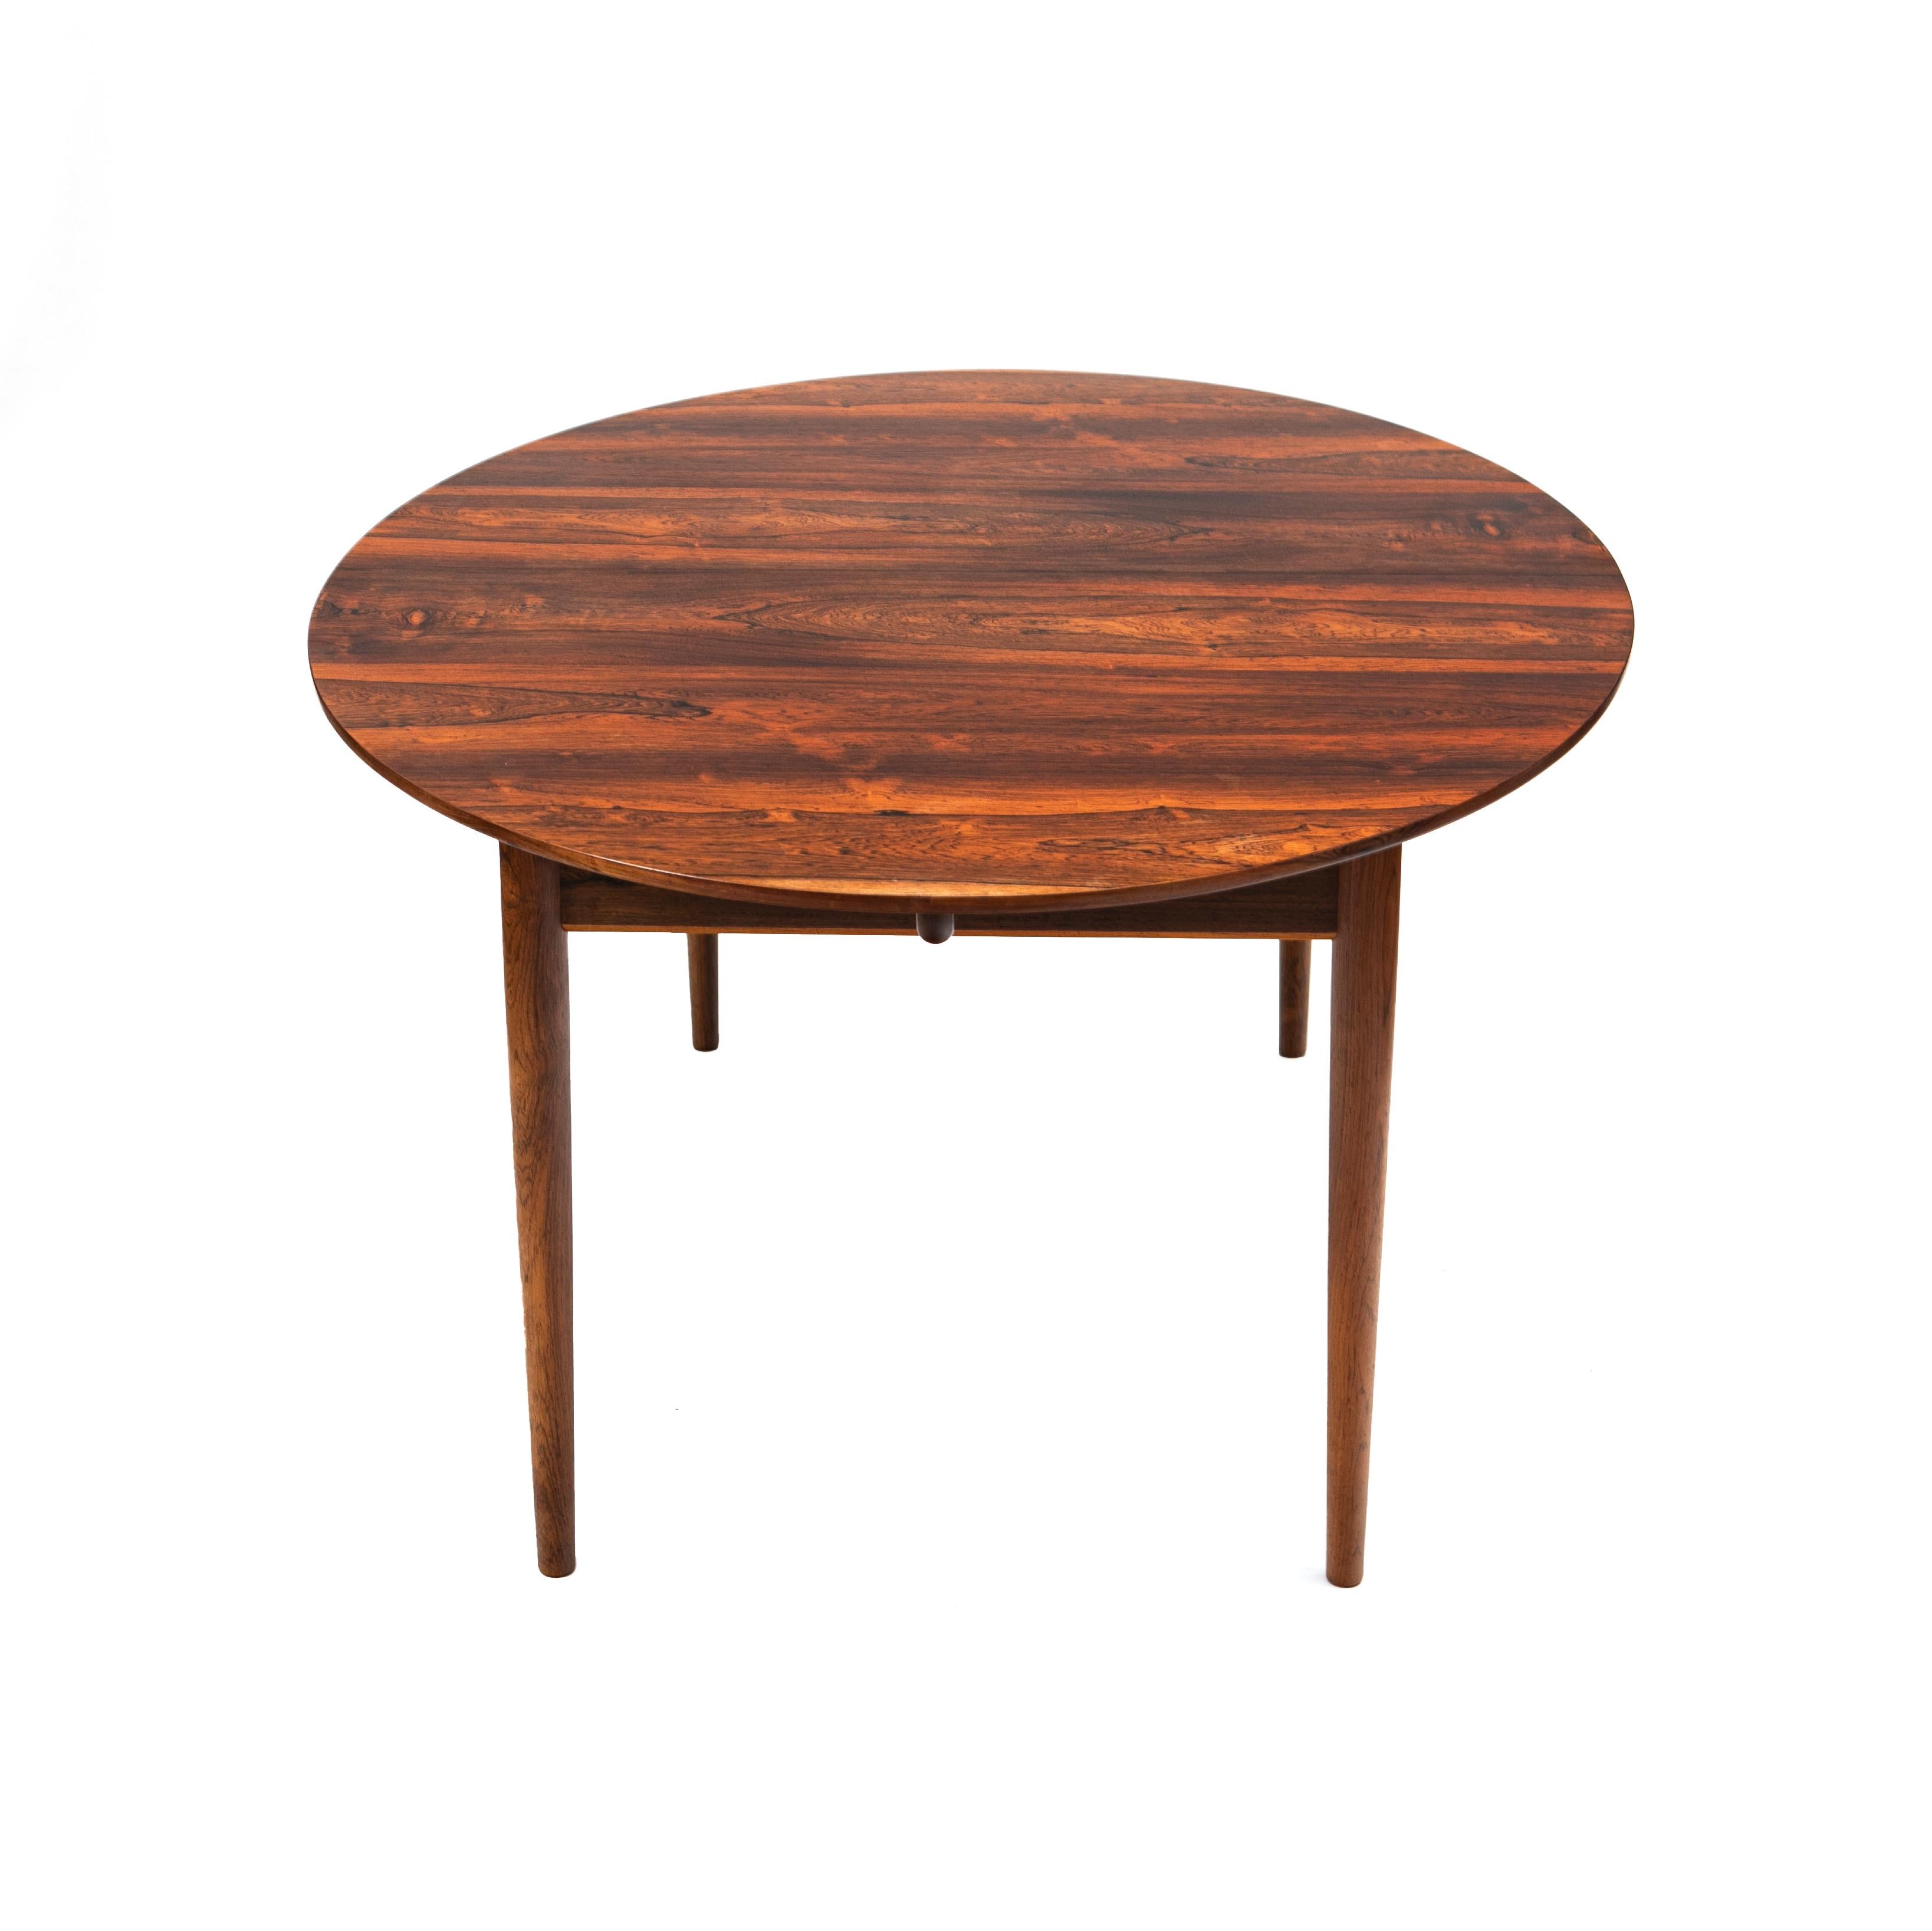 Finn Juhl oval 'Judas' dining table Rio rosewood / palisander. Come with two extension leaves. The table has a beautiful grain.
Marked under on the extension: 